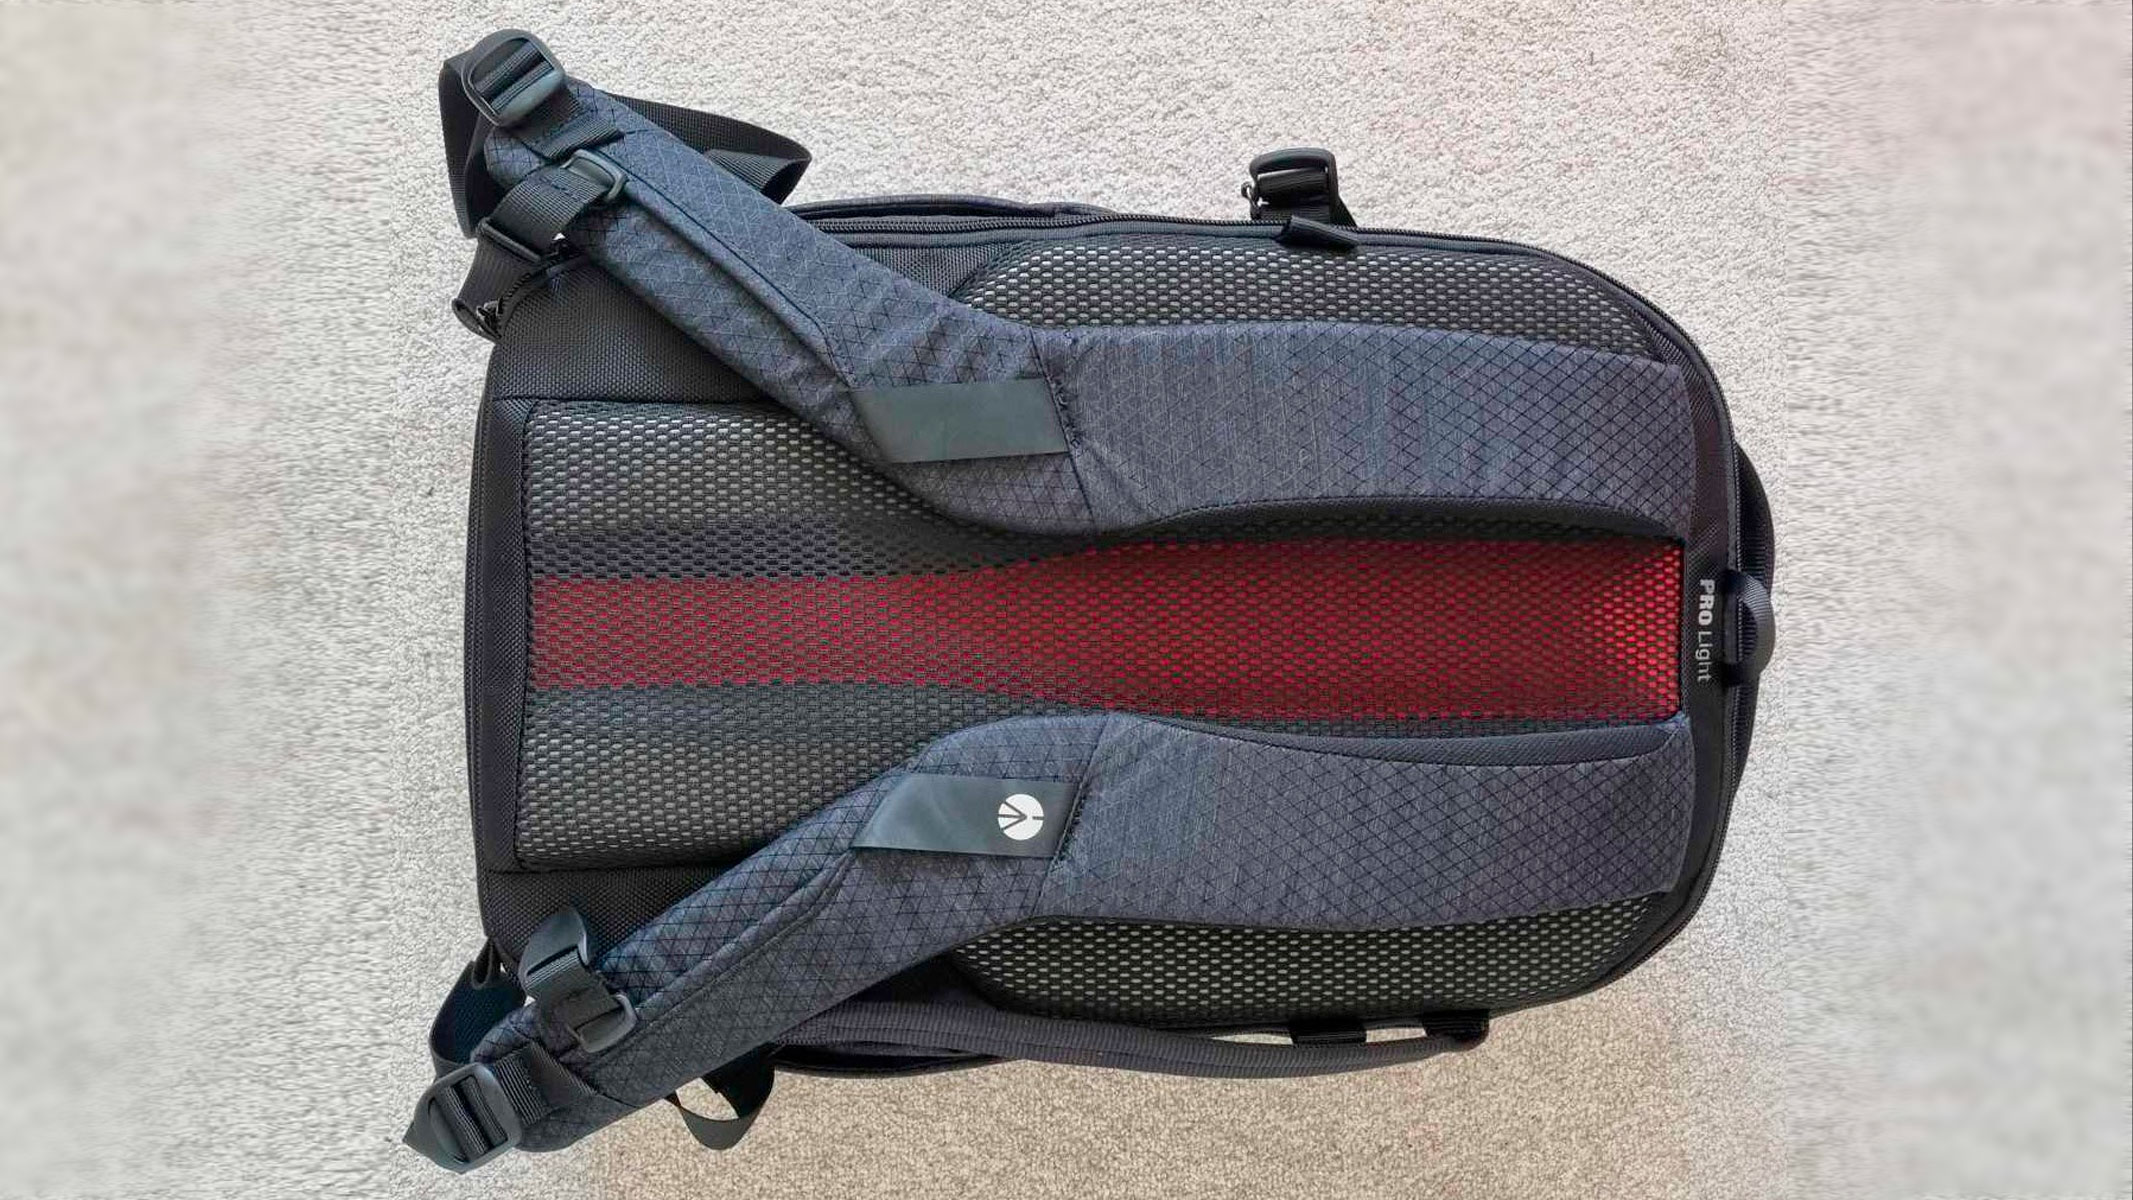 Camera backpack placed rear side up on a carpet